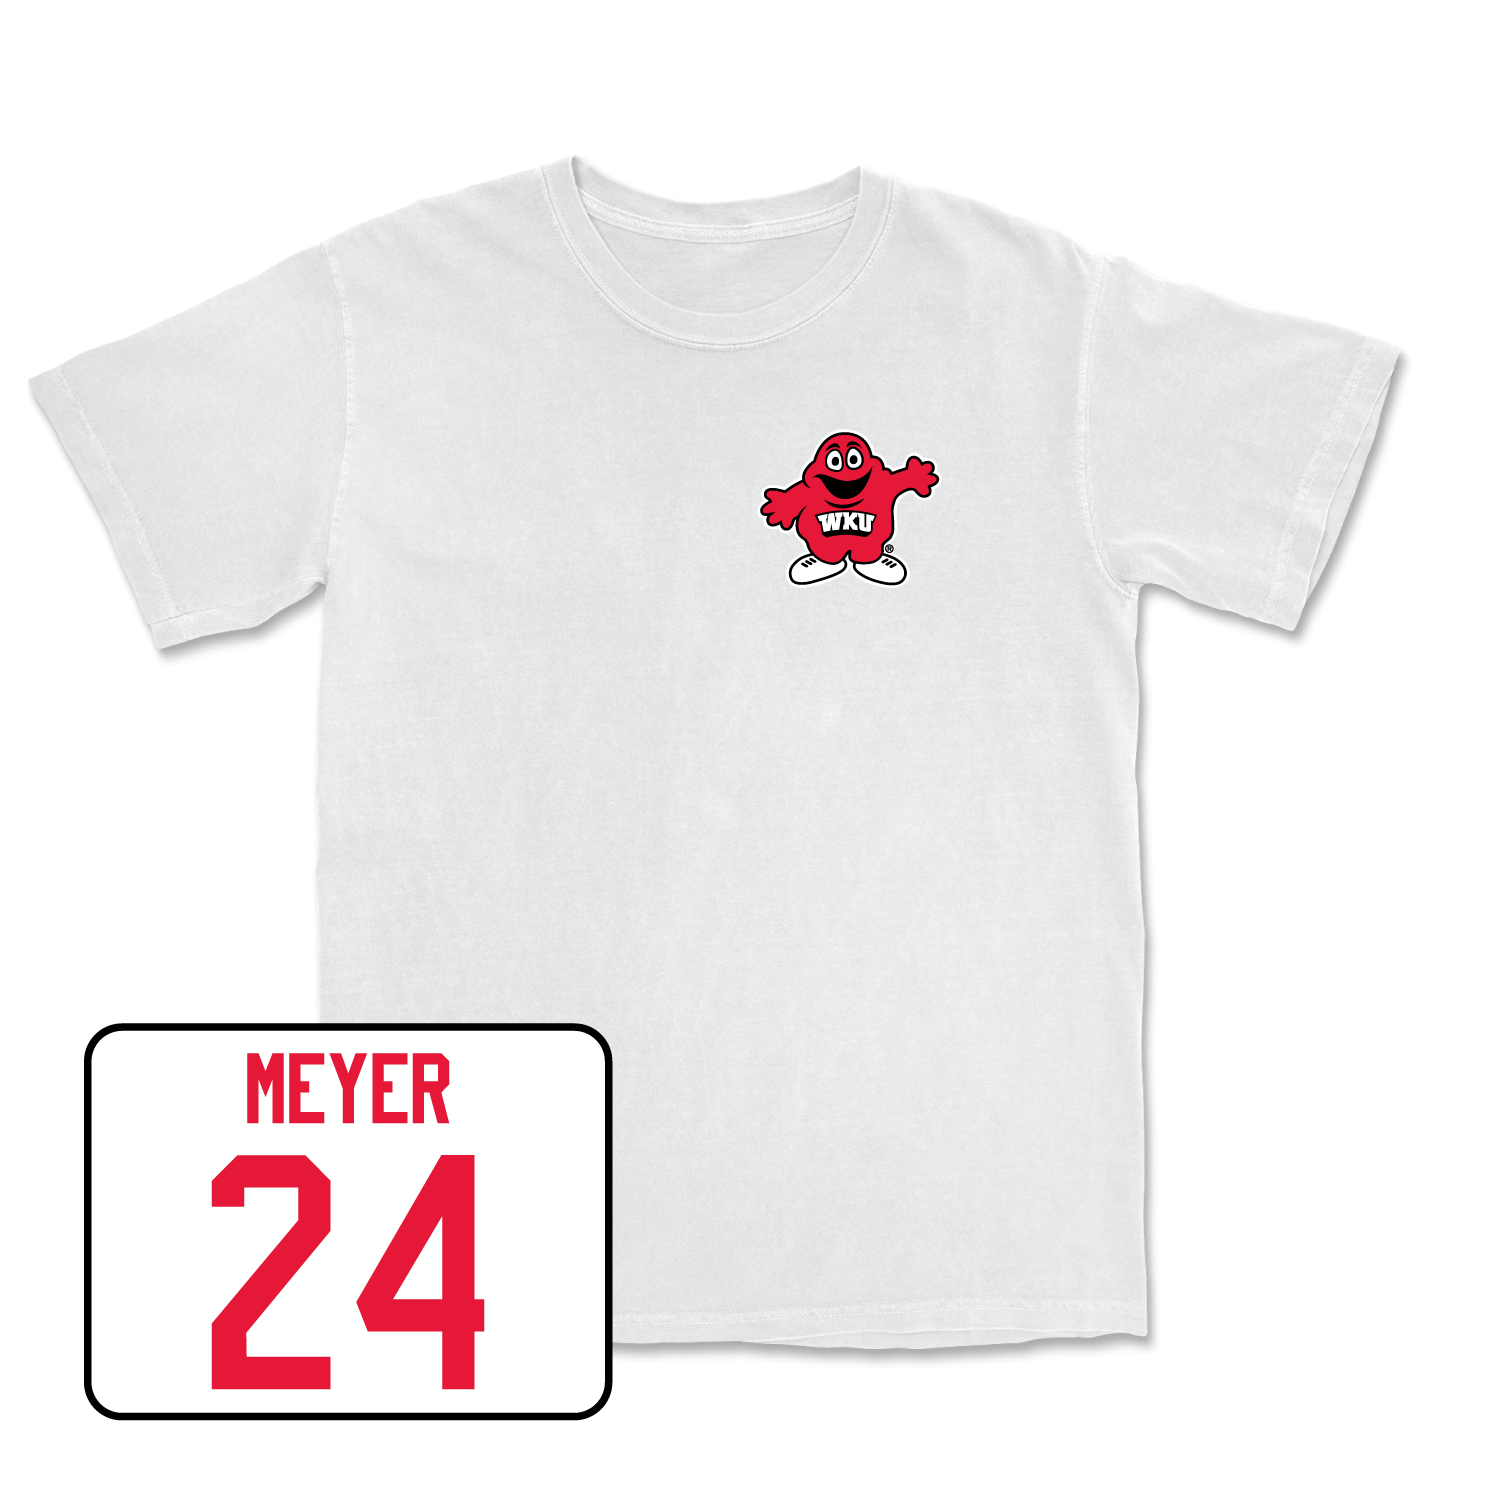 White Women's Soccer Big Red Comfort Colors Tee 2 4X-Large / Kayla Meyer | #24